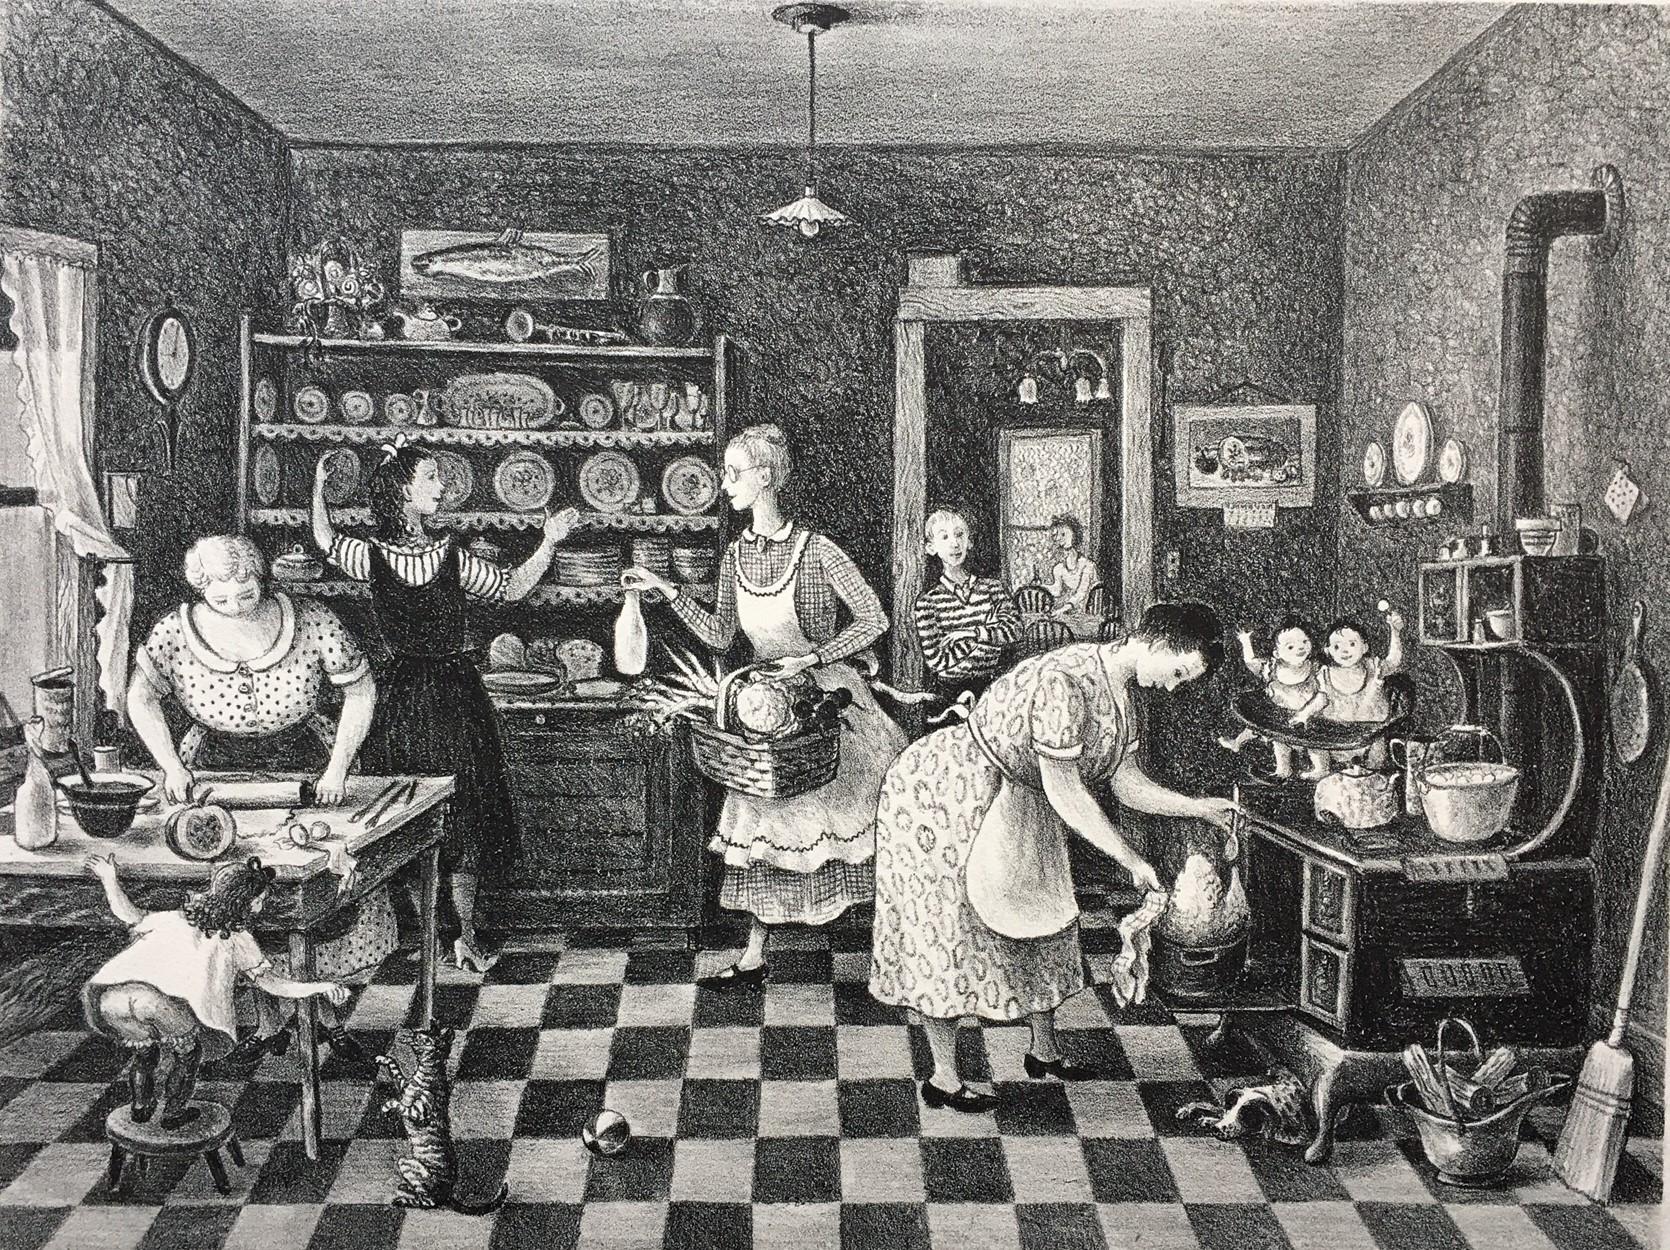 Doris Lee
Thanksgiving, 1942
Signed lower right, titled lower left
Lithograph on paper
Image 8 3/4 x 11 3/4 inches
Sheet 12 x 17 inches
From the edition of 250

An American Scene painter of realistic subjects in a style that combined Realism and